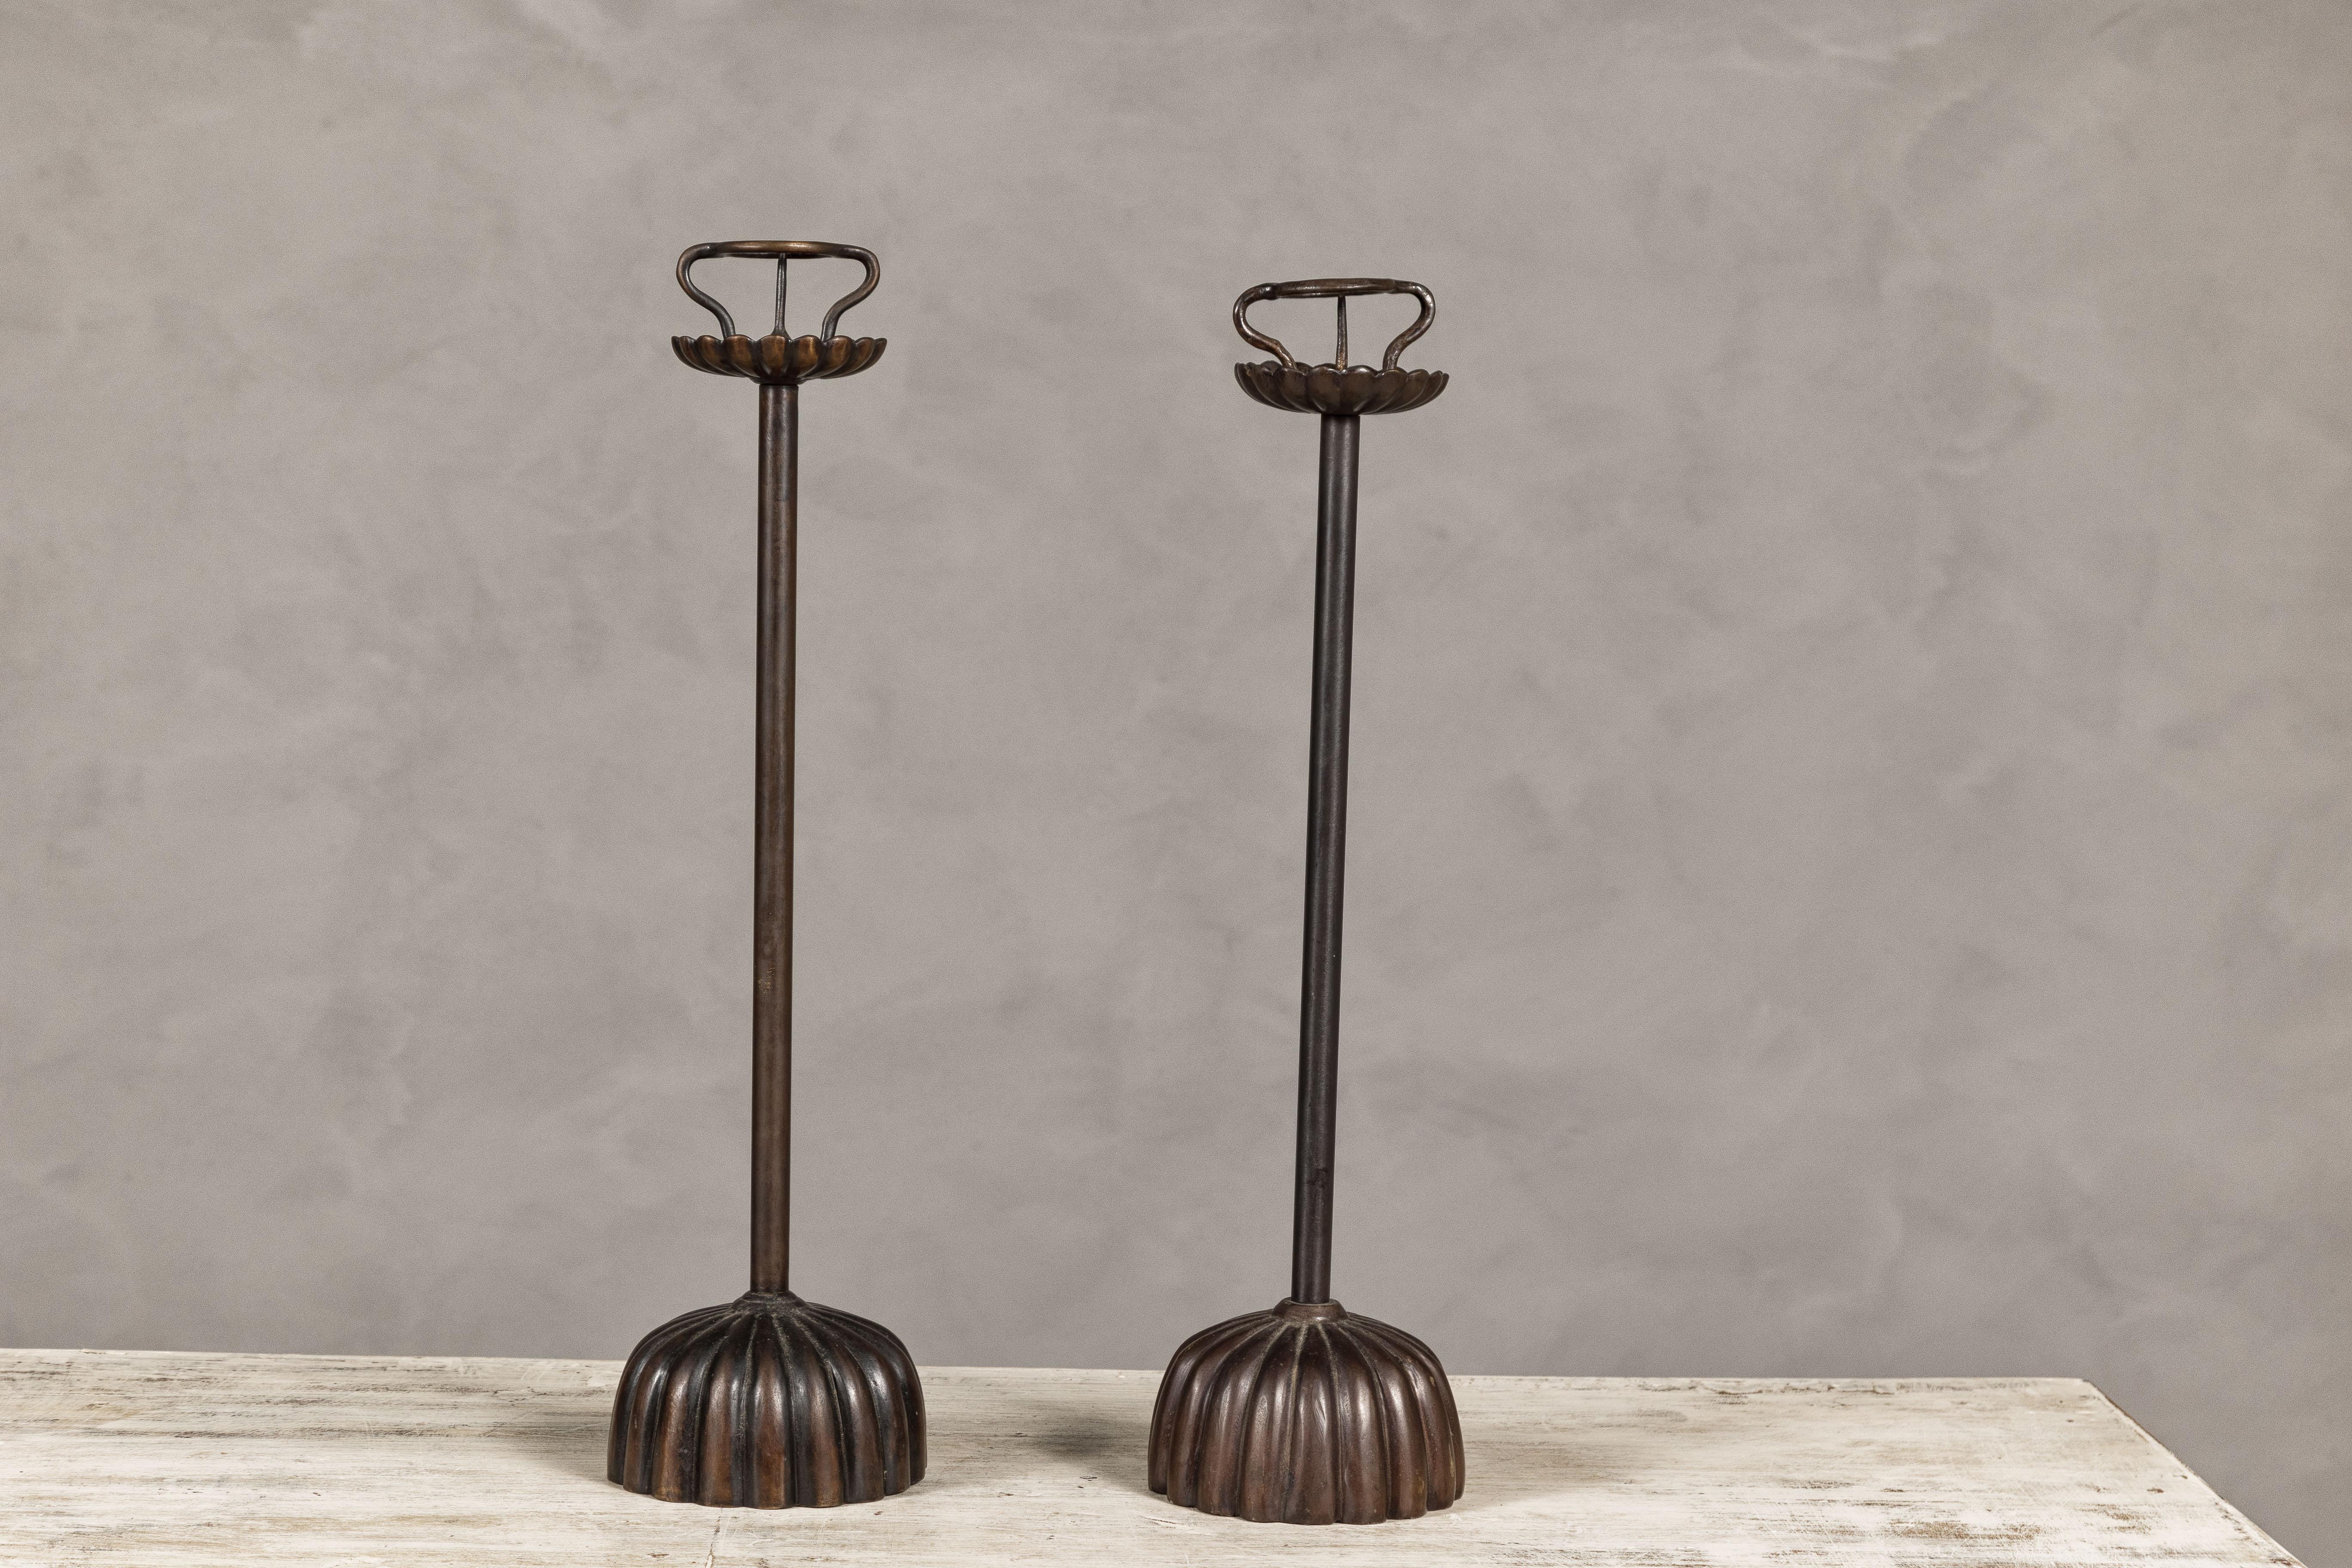 A near pair of Japanese metal candleholders from the mid 20th century with gadrooned bases. This near pair of mid-20th century Japanese metal candleholders captivates with its simplicity and attention to detail, featuring elegantly gadrooned bases